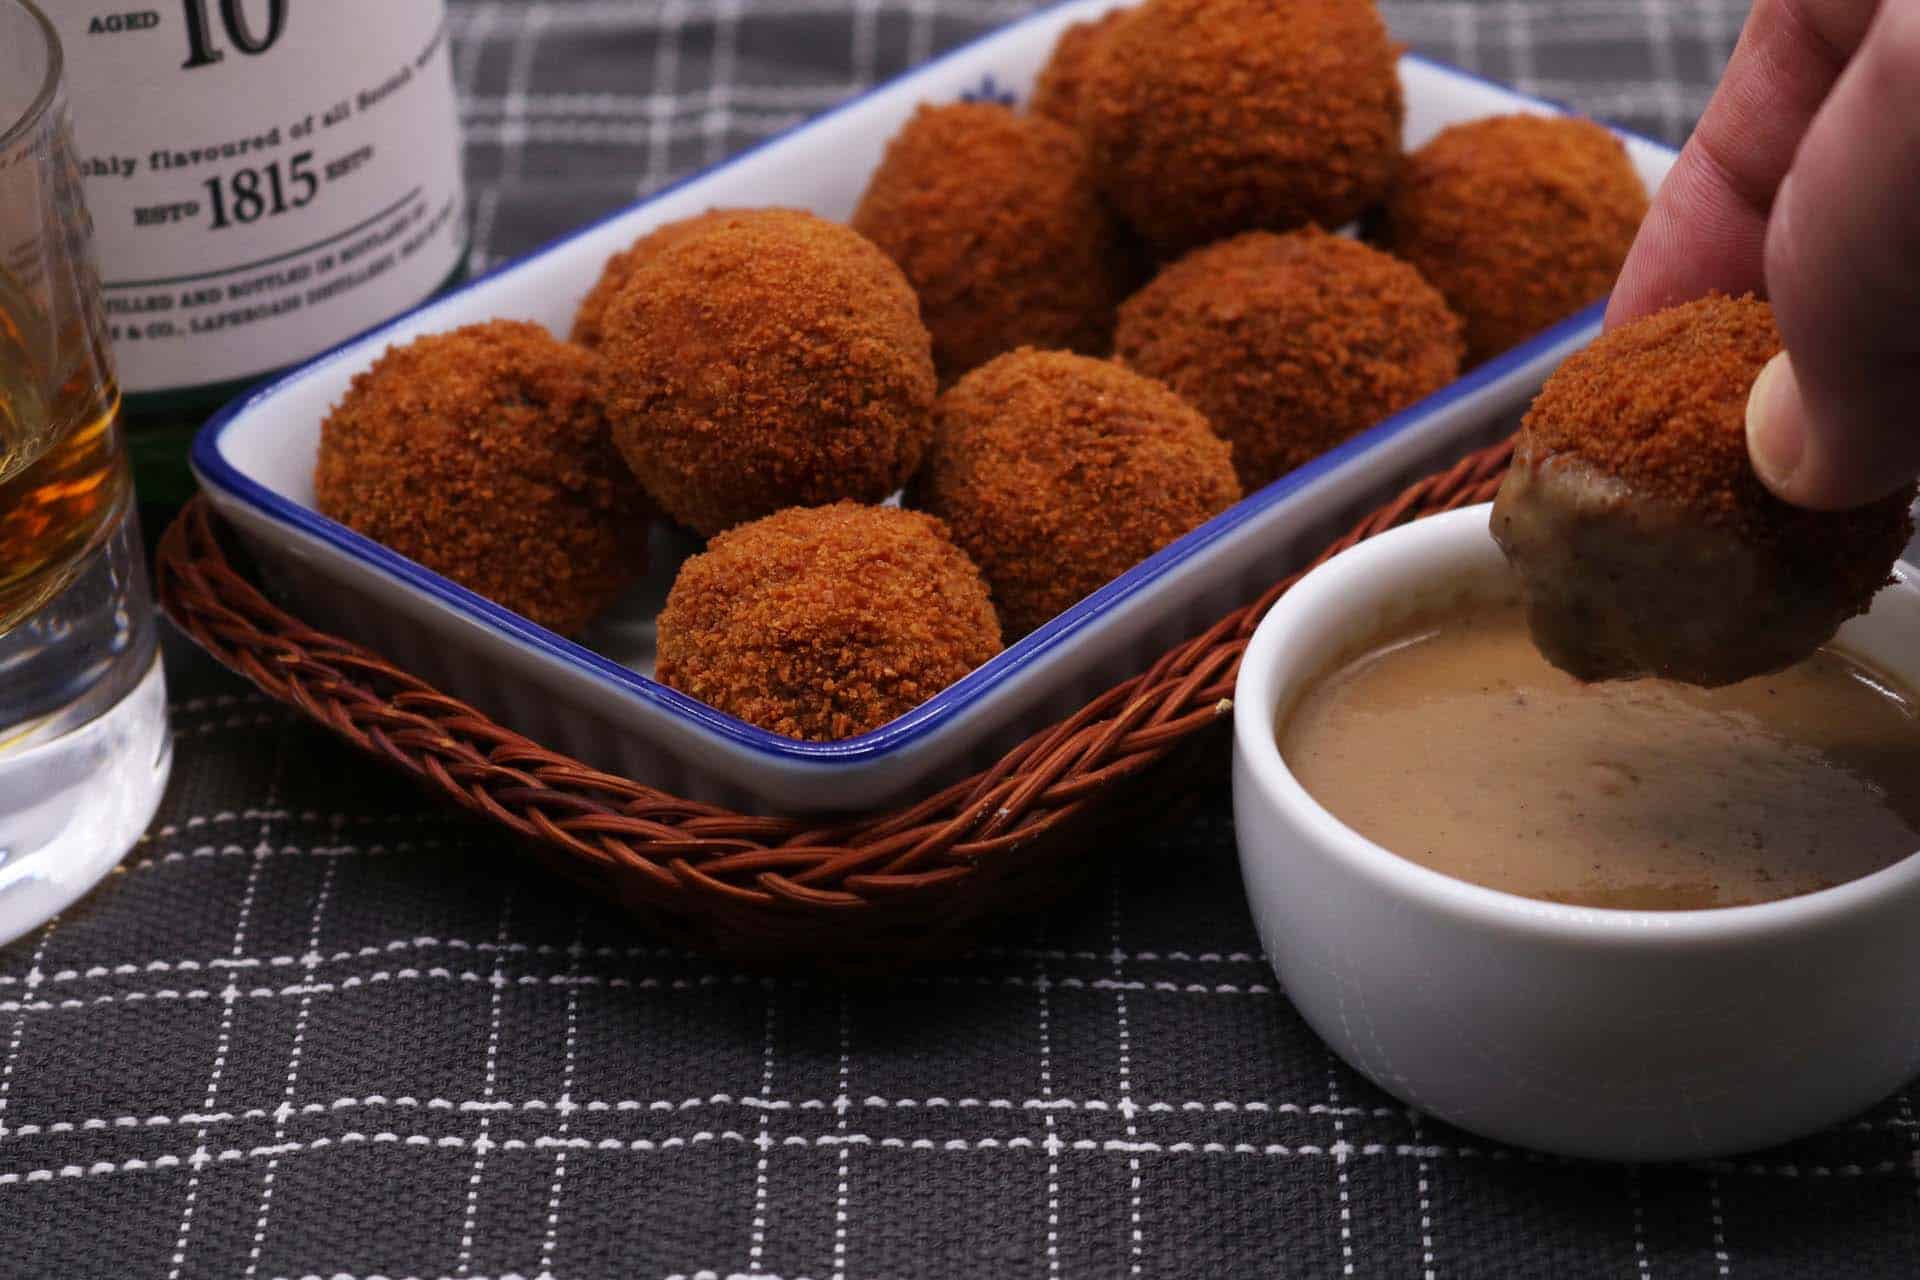 Haggis Balls with Whisky Sauce, Haggis Balls with Whisky Sauce